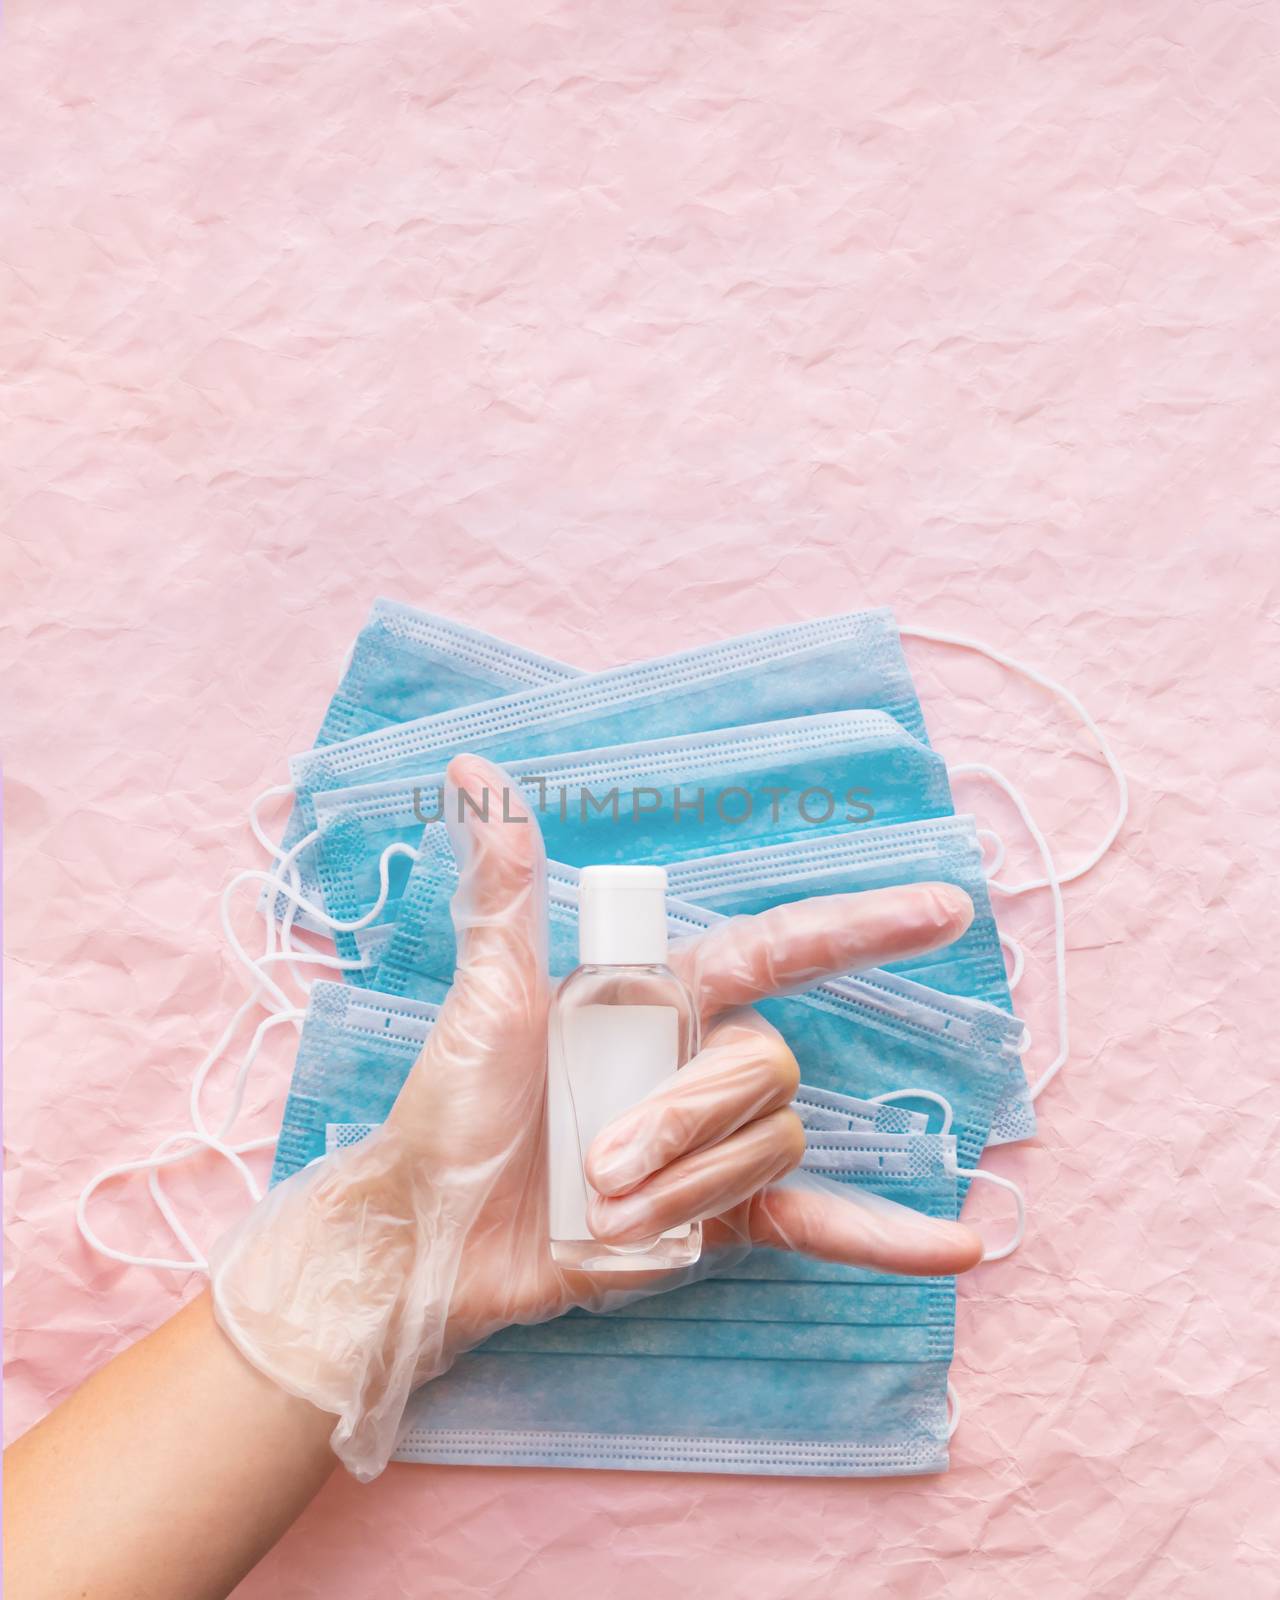 Top view on hand in protective gloves with medical masks and sanitizer in transparent bottle. Woman make victory gesture. Coronavirus COVID-19 concept on pink crumpled background with copy space.